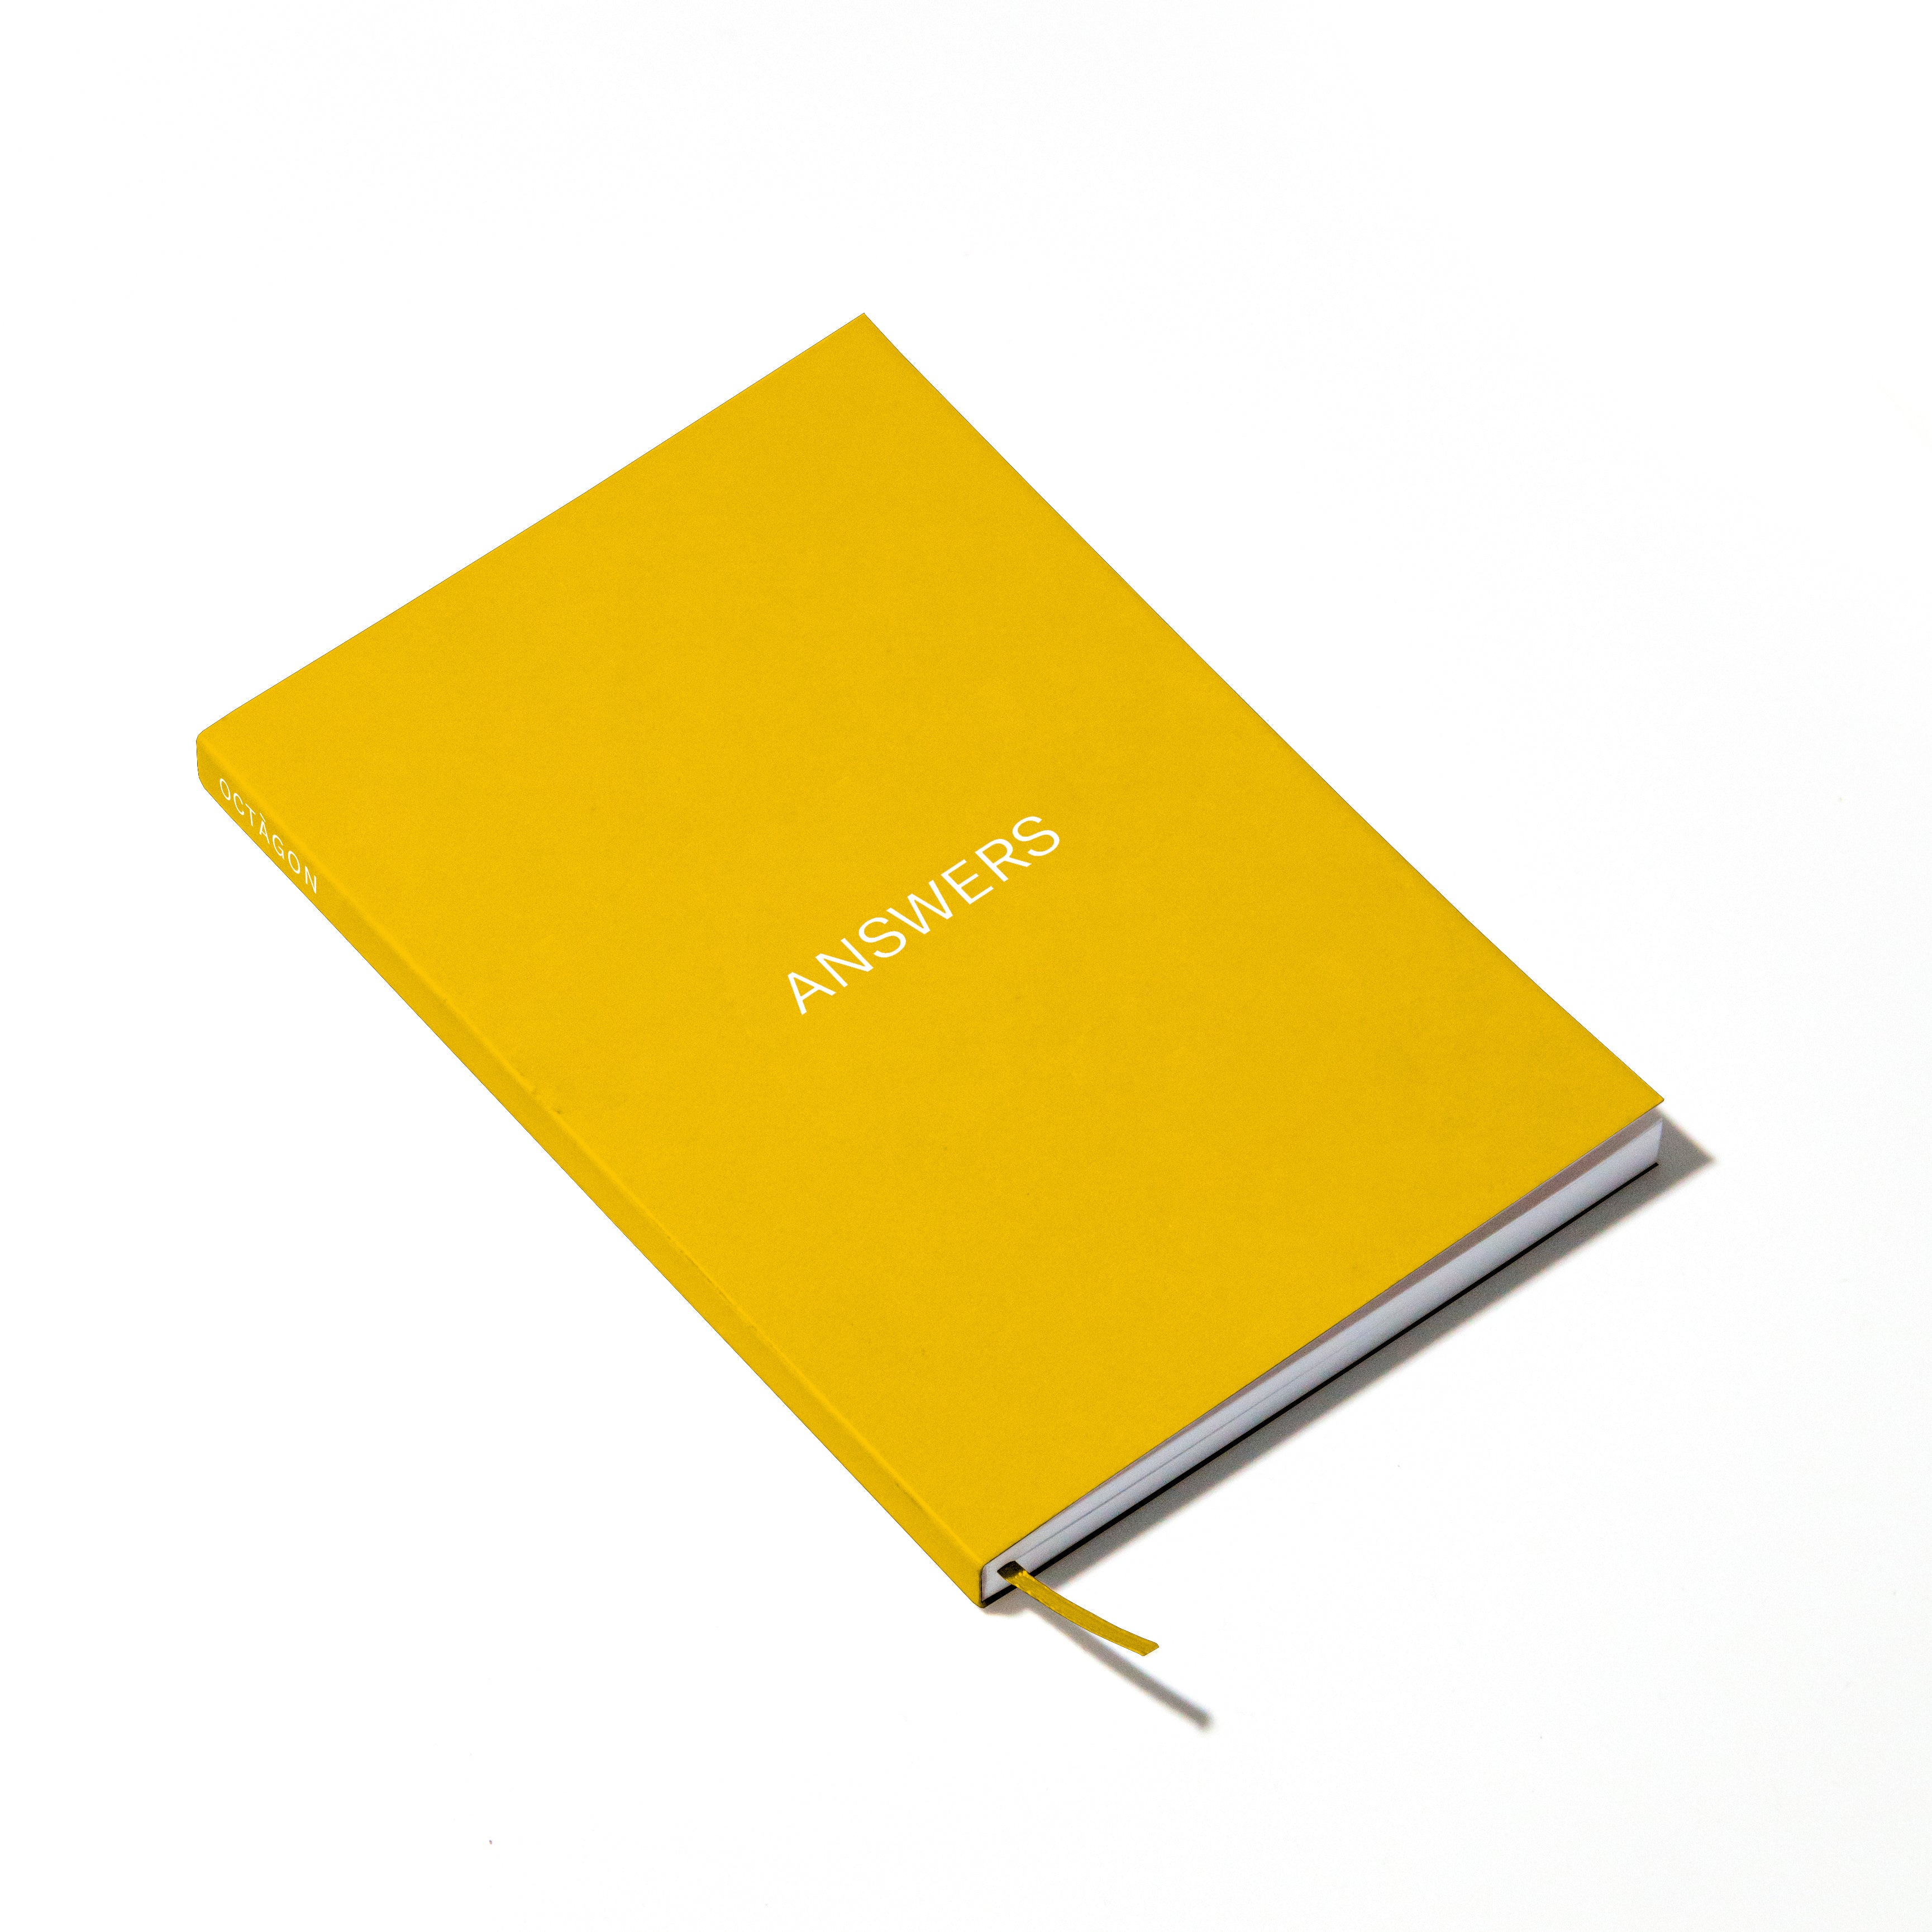 OCTÀGON DESIGN | Answers Notebook | Yellow cover and white typography.  